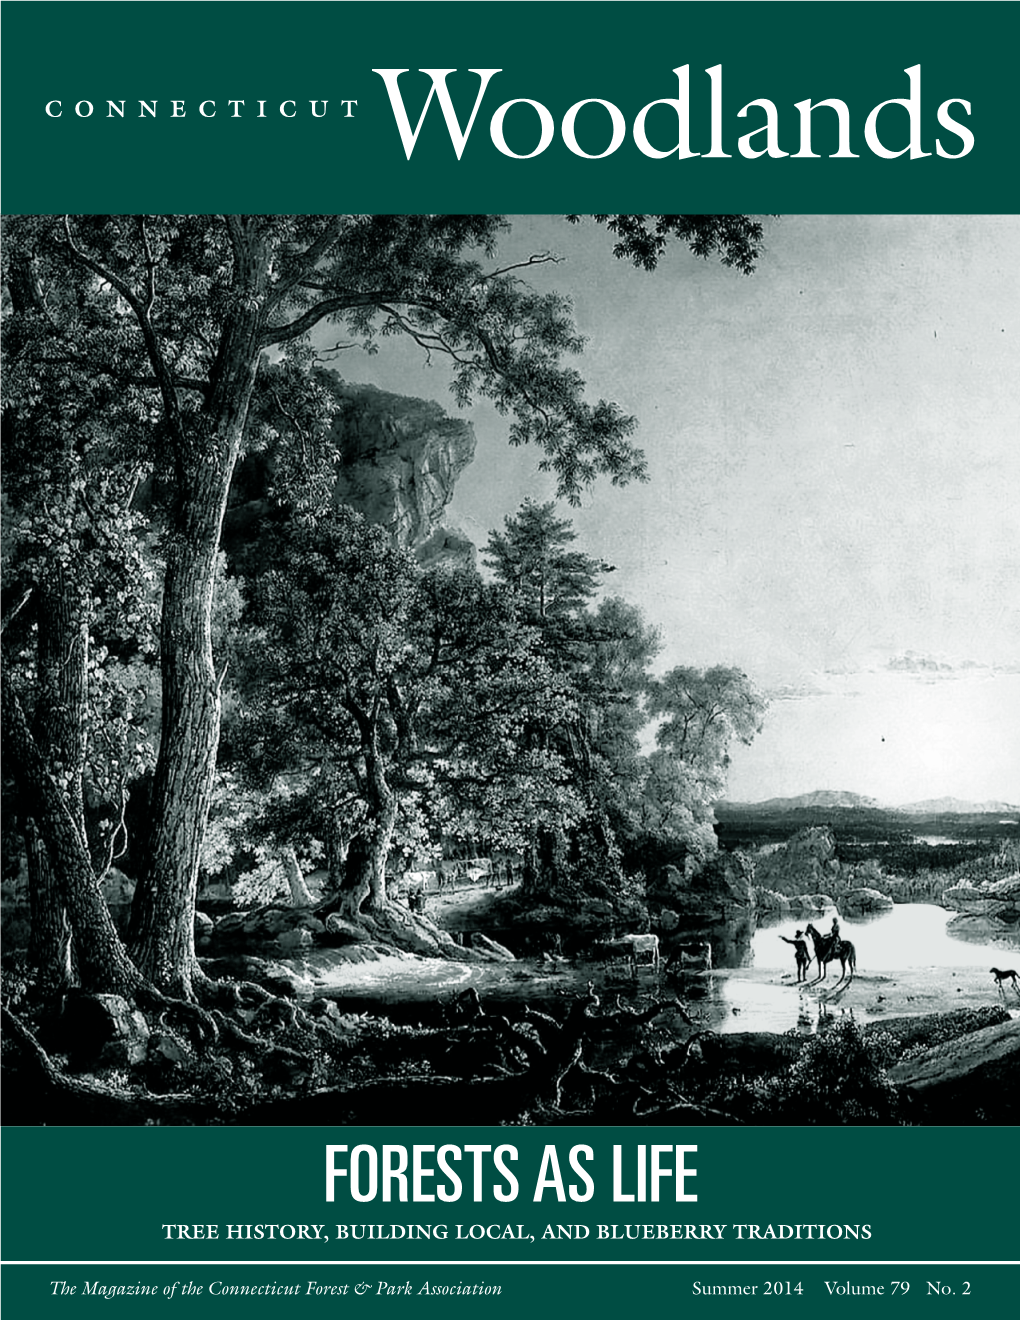 Forests As Life Tree History, Building Local, and Blueberry Traditions